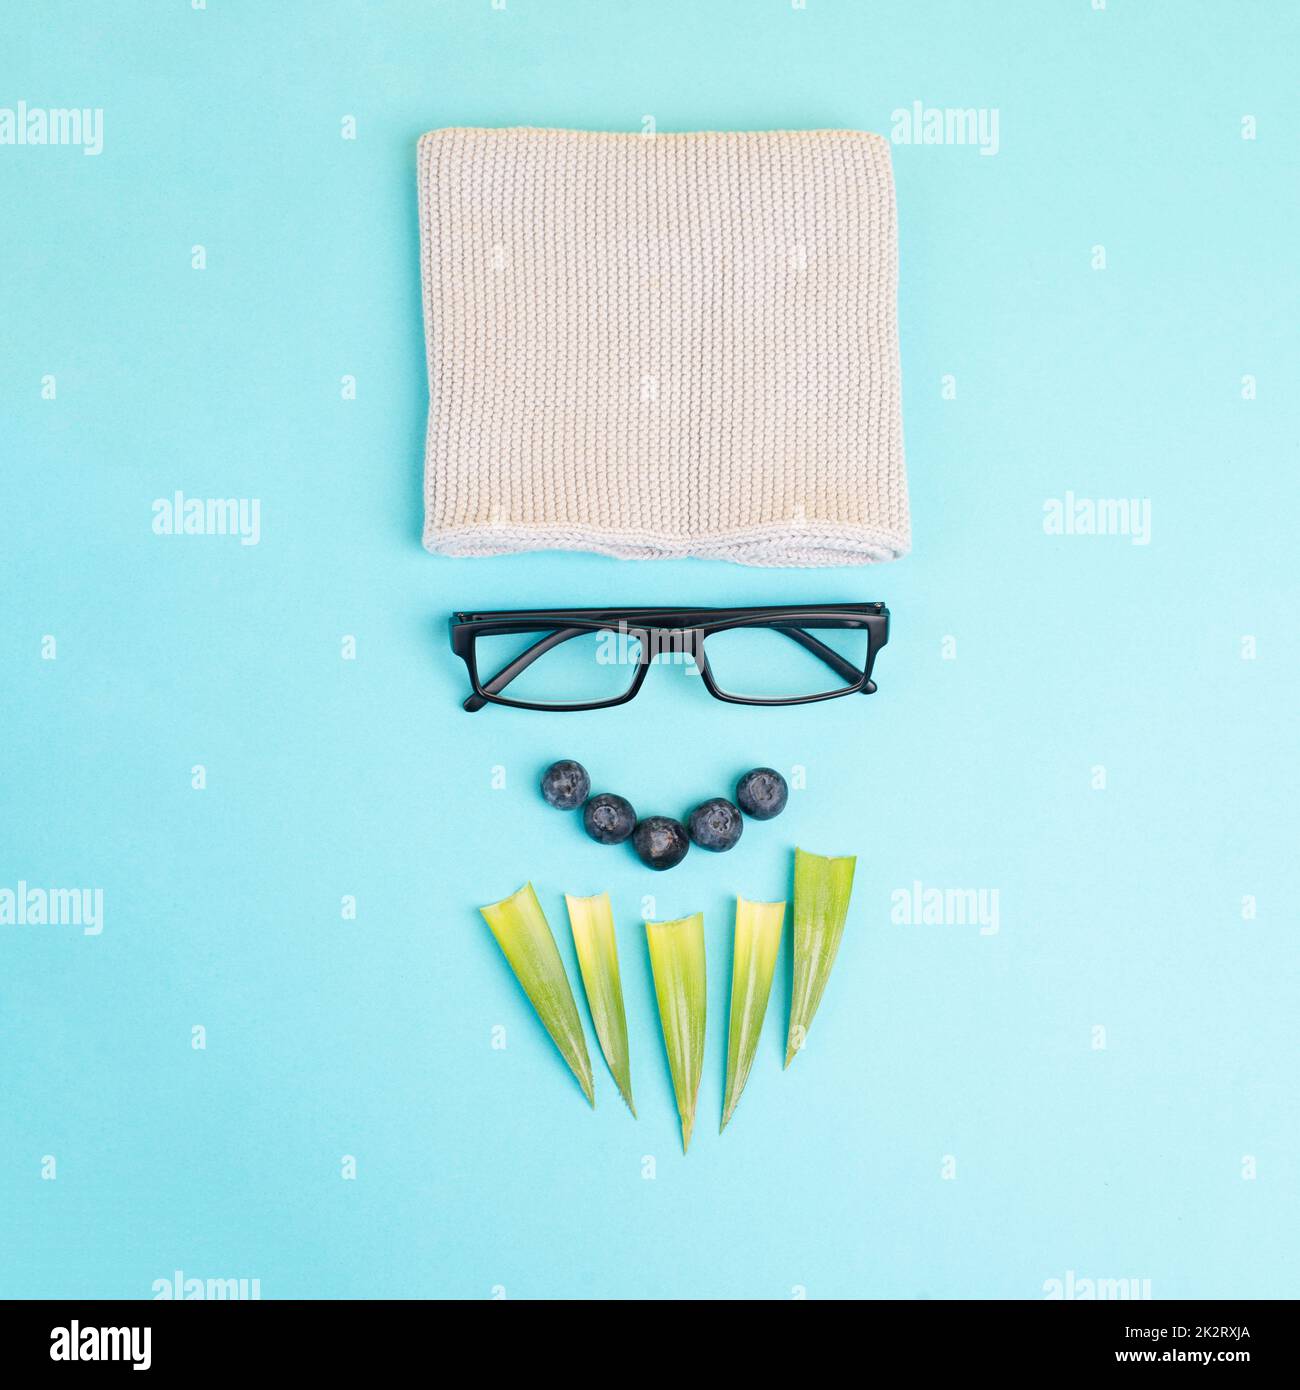 Human face of a man made with a wool hat, glasses and leaves as a beard, funny minimalist portrait, eco freak lifestyle, nerd Stock Photo